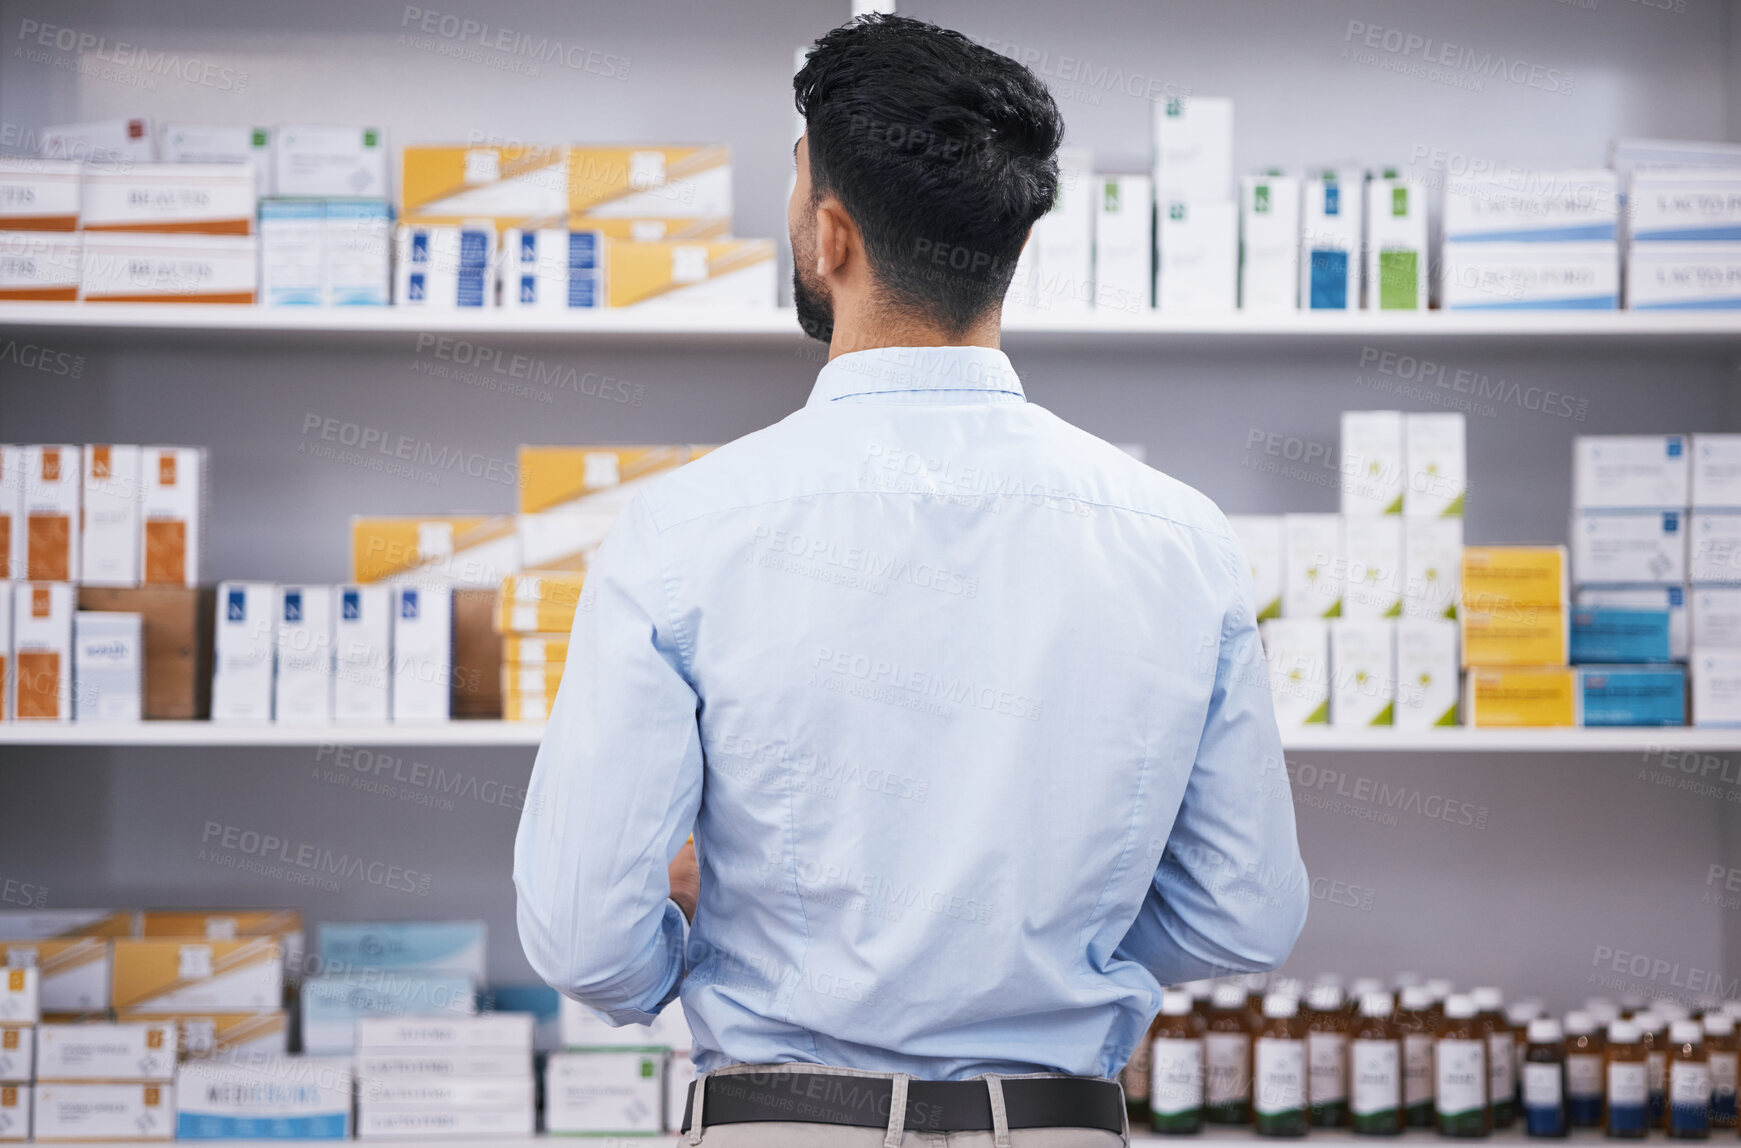 Buy stock photo Pharmacy, medicine and back of man check shelf for medication, prescription and treatment. Healthcare clinic, drug store and male person reading boxes for medical product, supplements and antibiotics